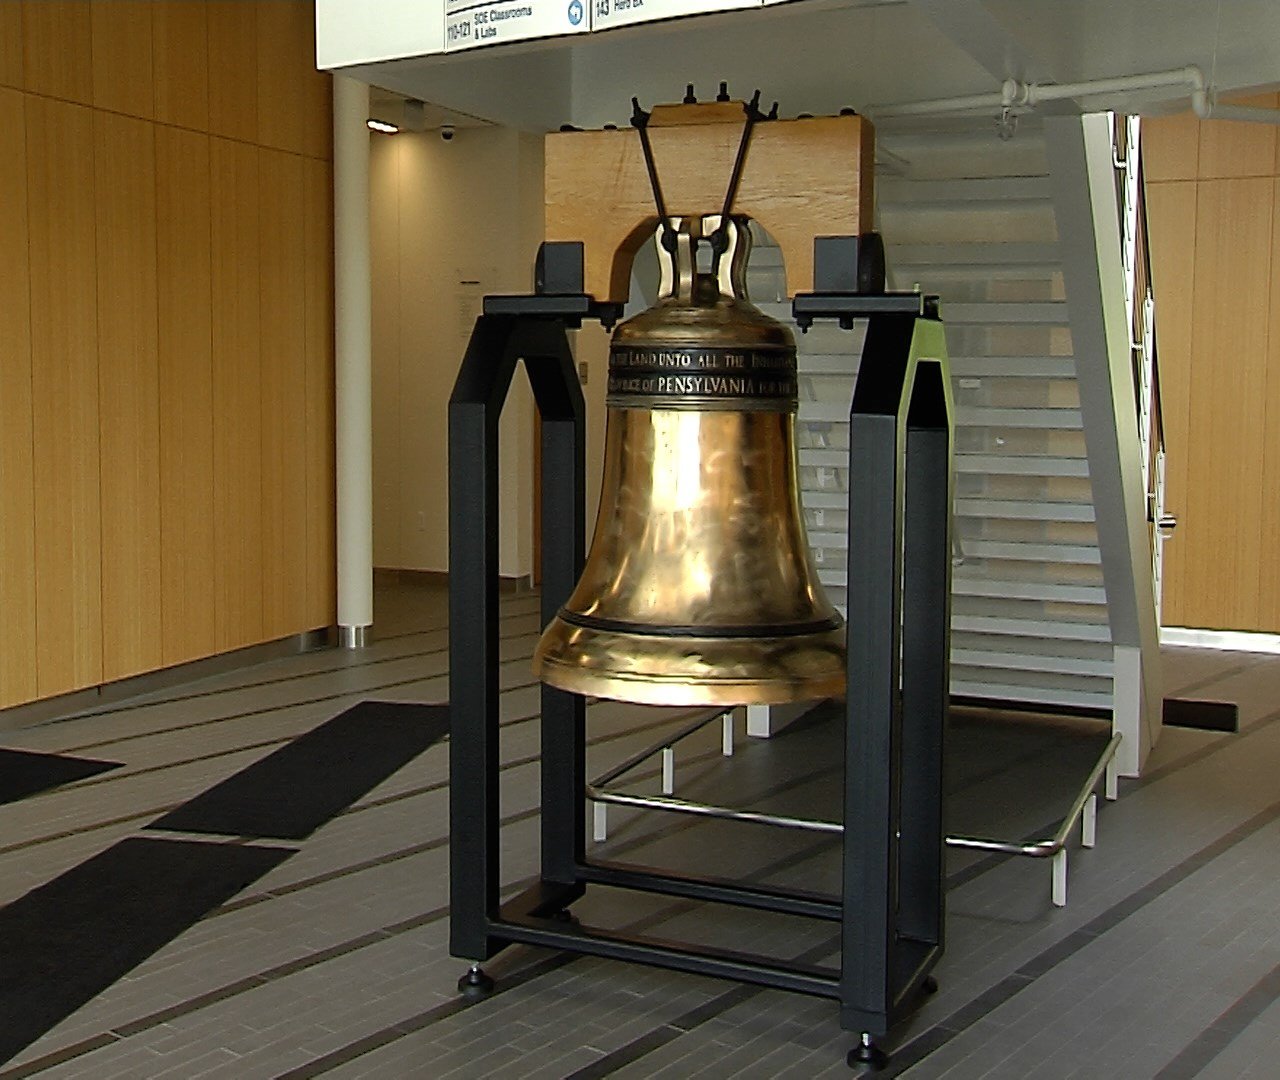 Replica Liberty Bell has a Home in Erie